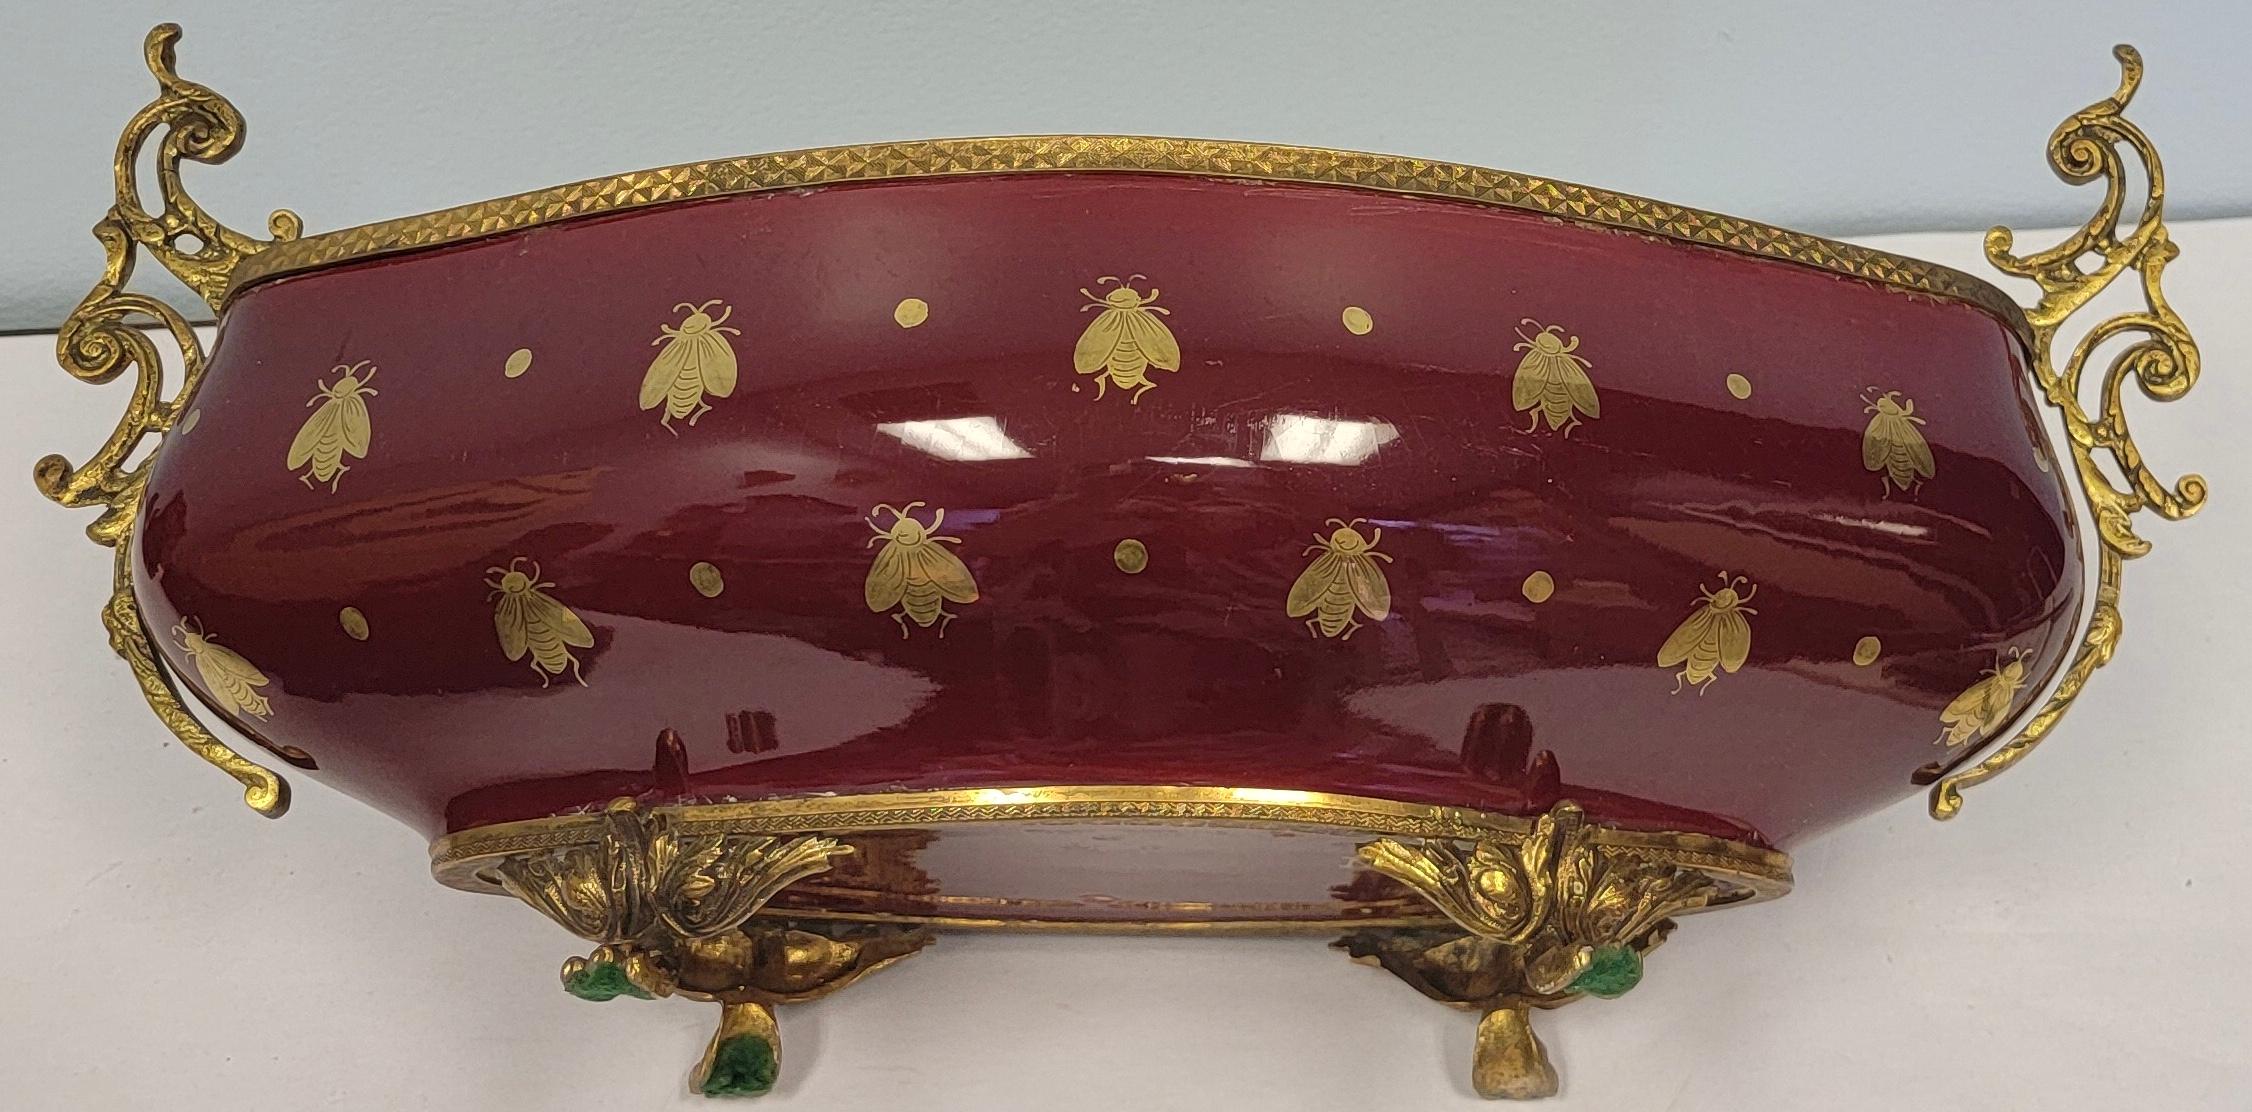 19th C. French Empire Gilt Bronze Jardiniere with Napoleonic Bee Motif In Good Condition For Sale In Kennesaw, GA